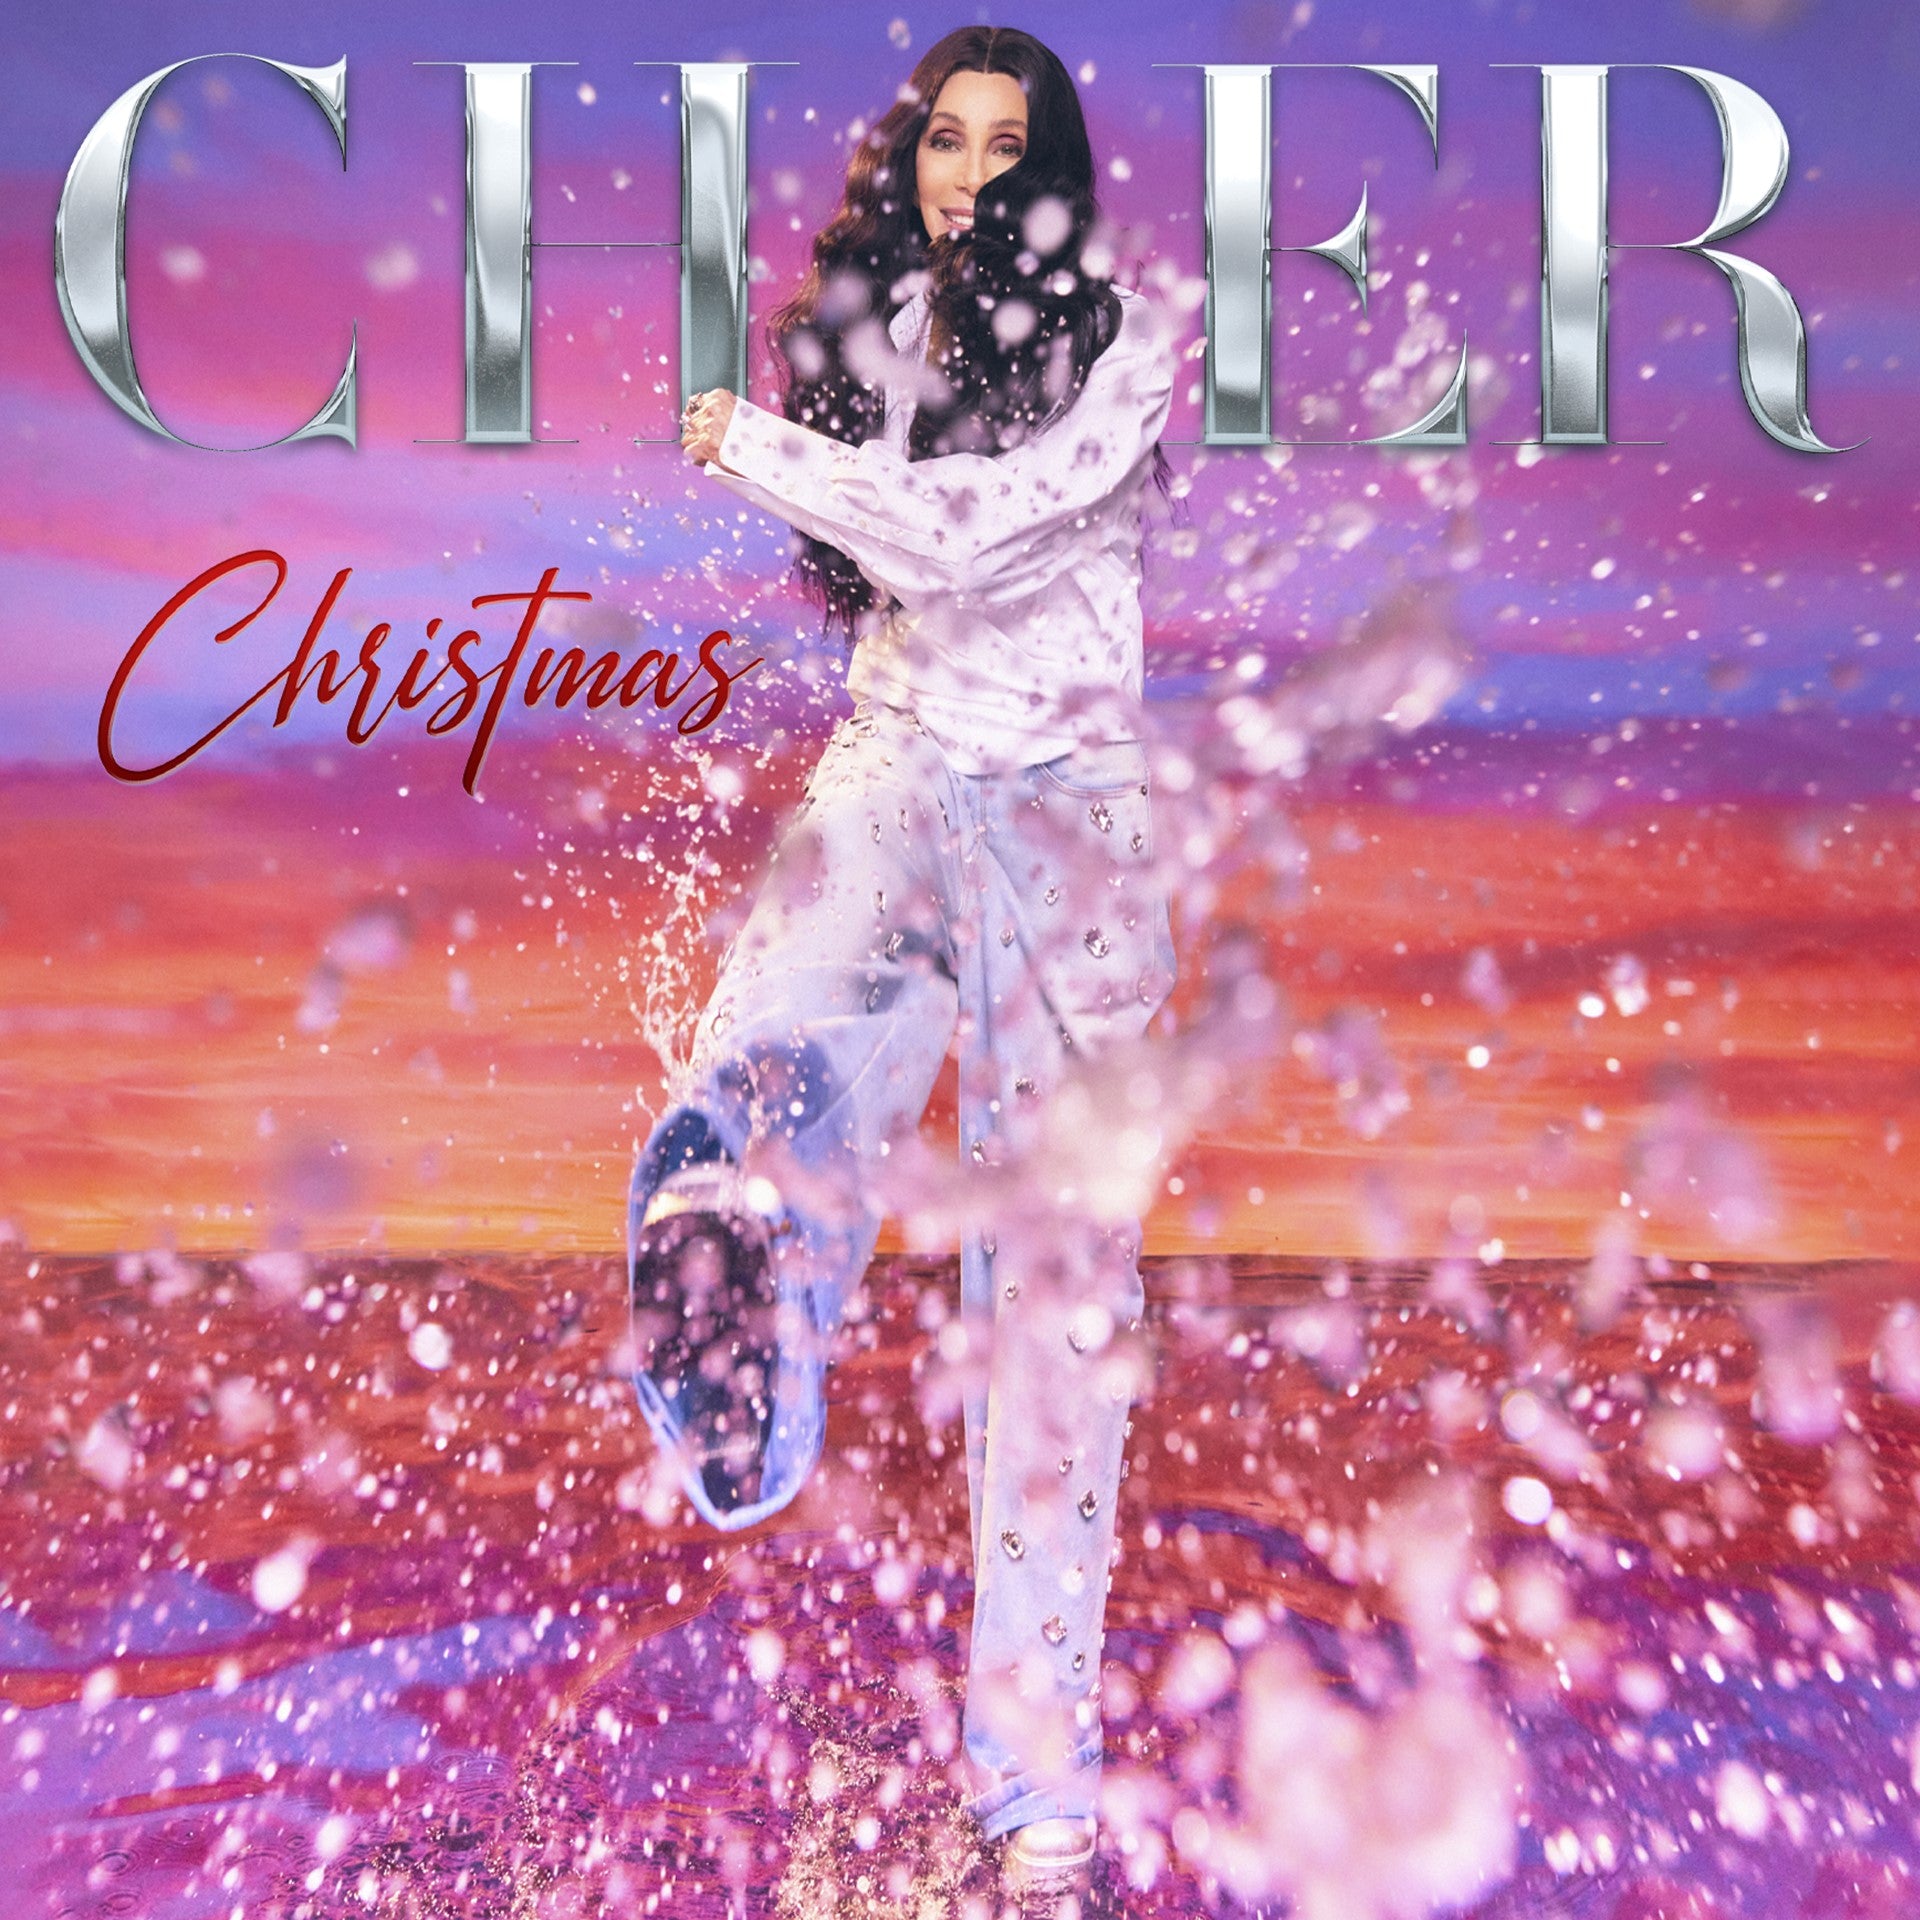 Cher Cher Christmas CD Cher Official Store